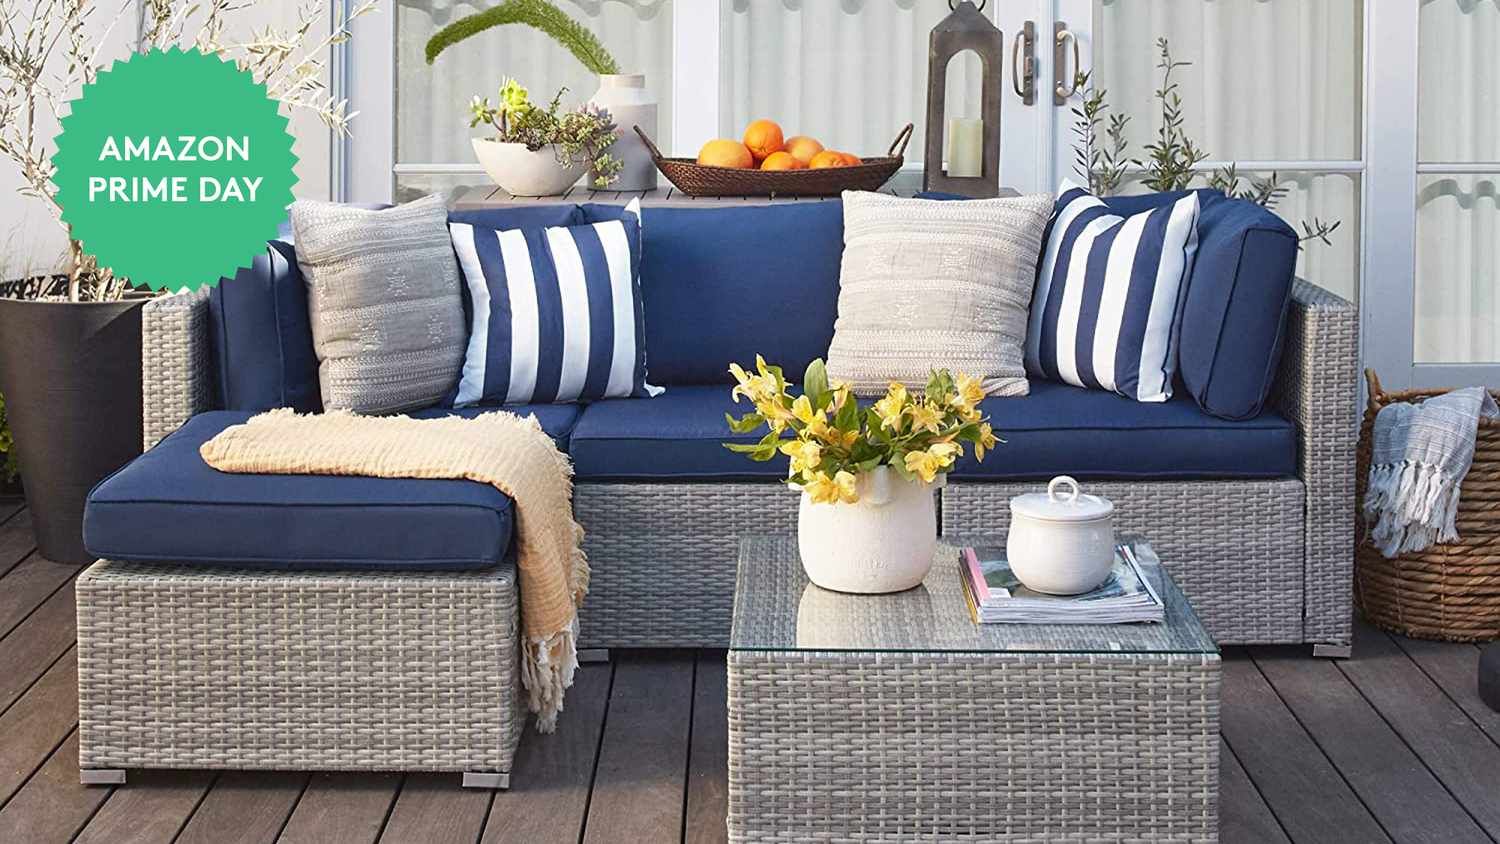 Epic Amazon Prime Day Patio Furniture Deals Up To 58% Off Intended For 5 Piece Patio Furniture Set (Photo 10 of 15)